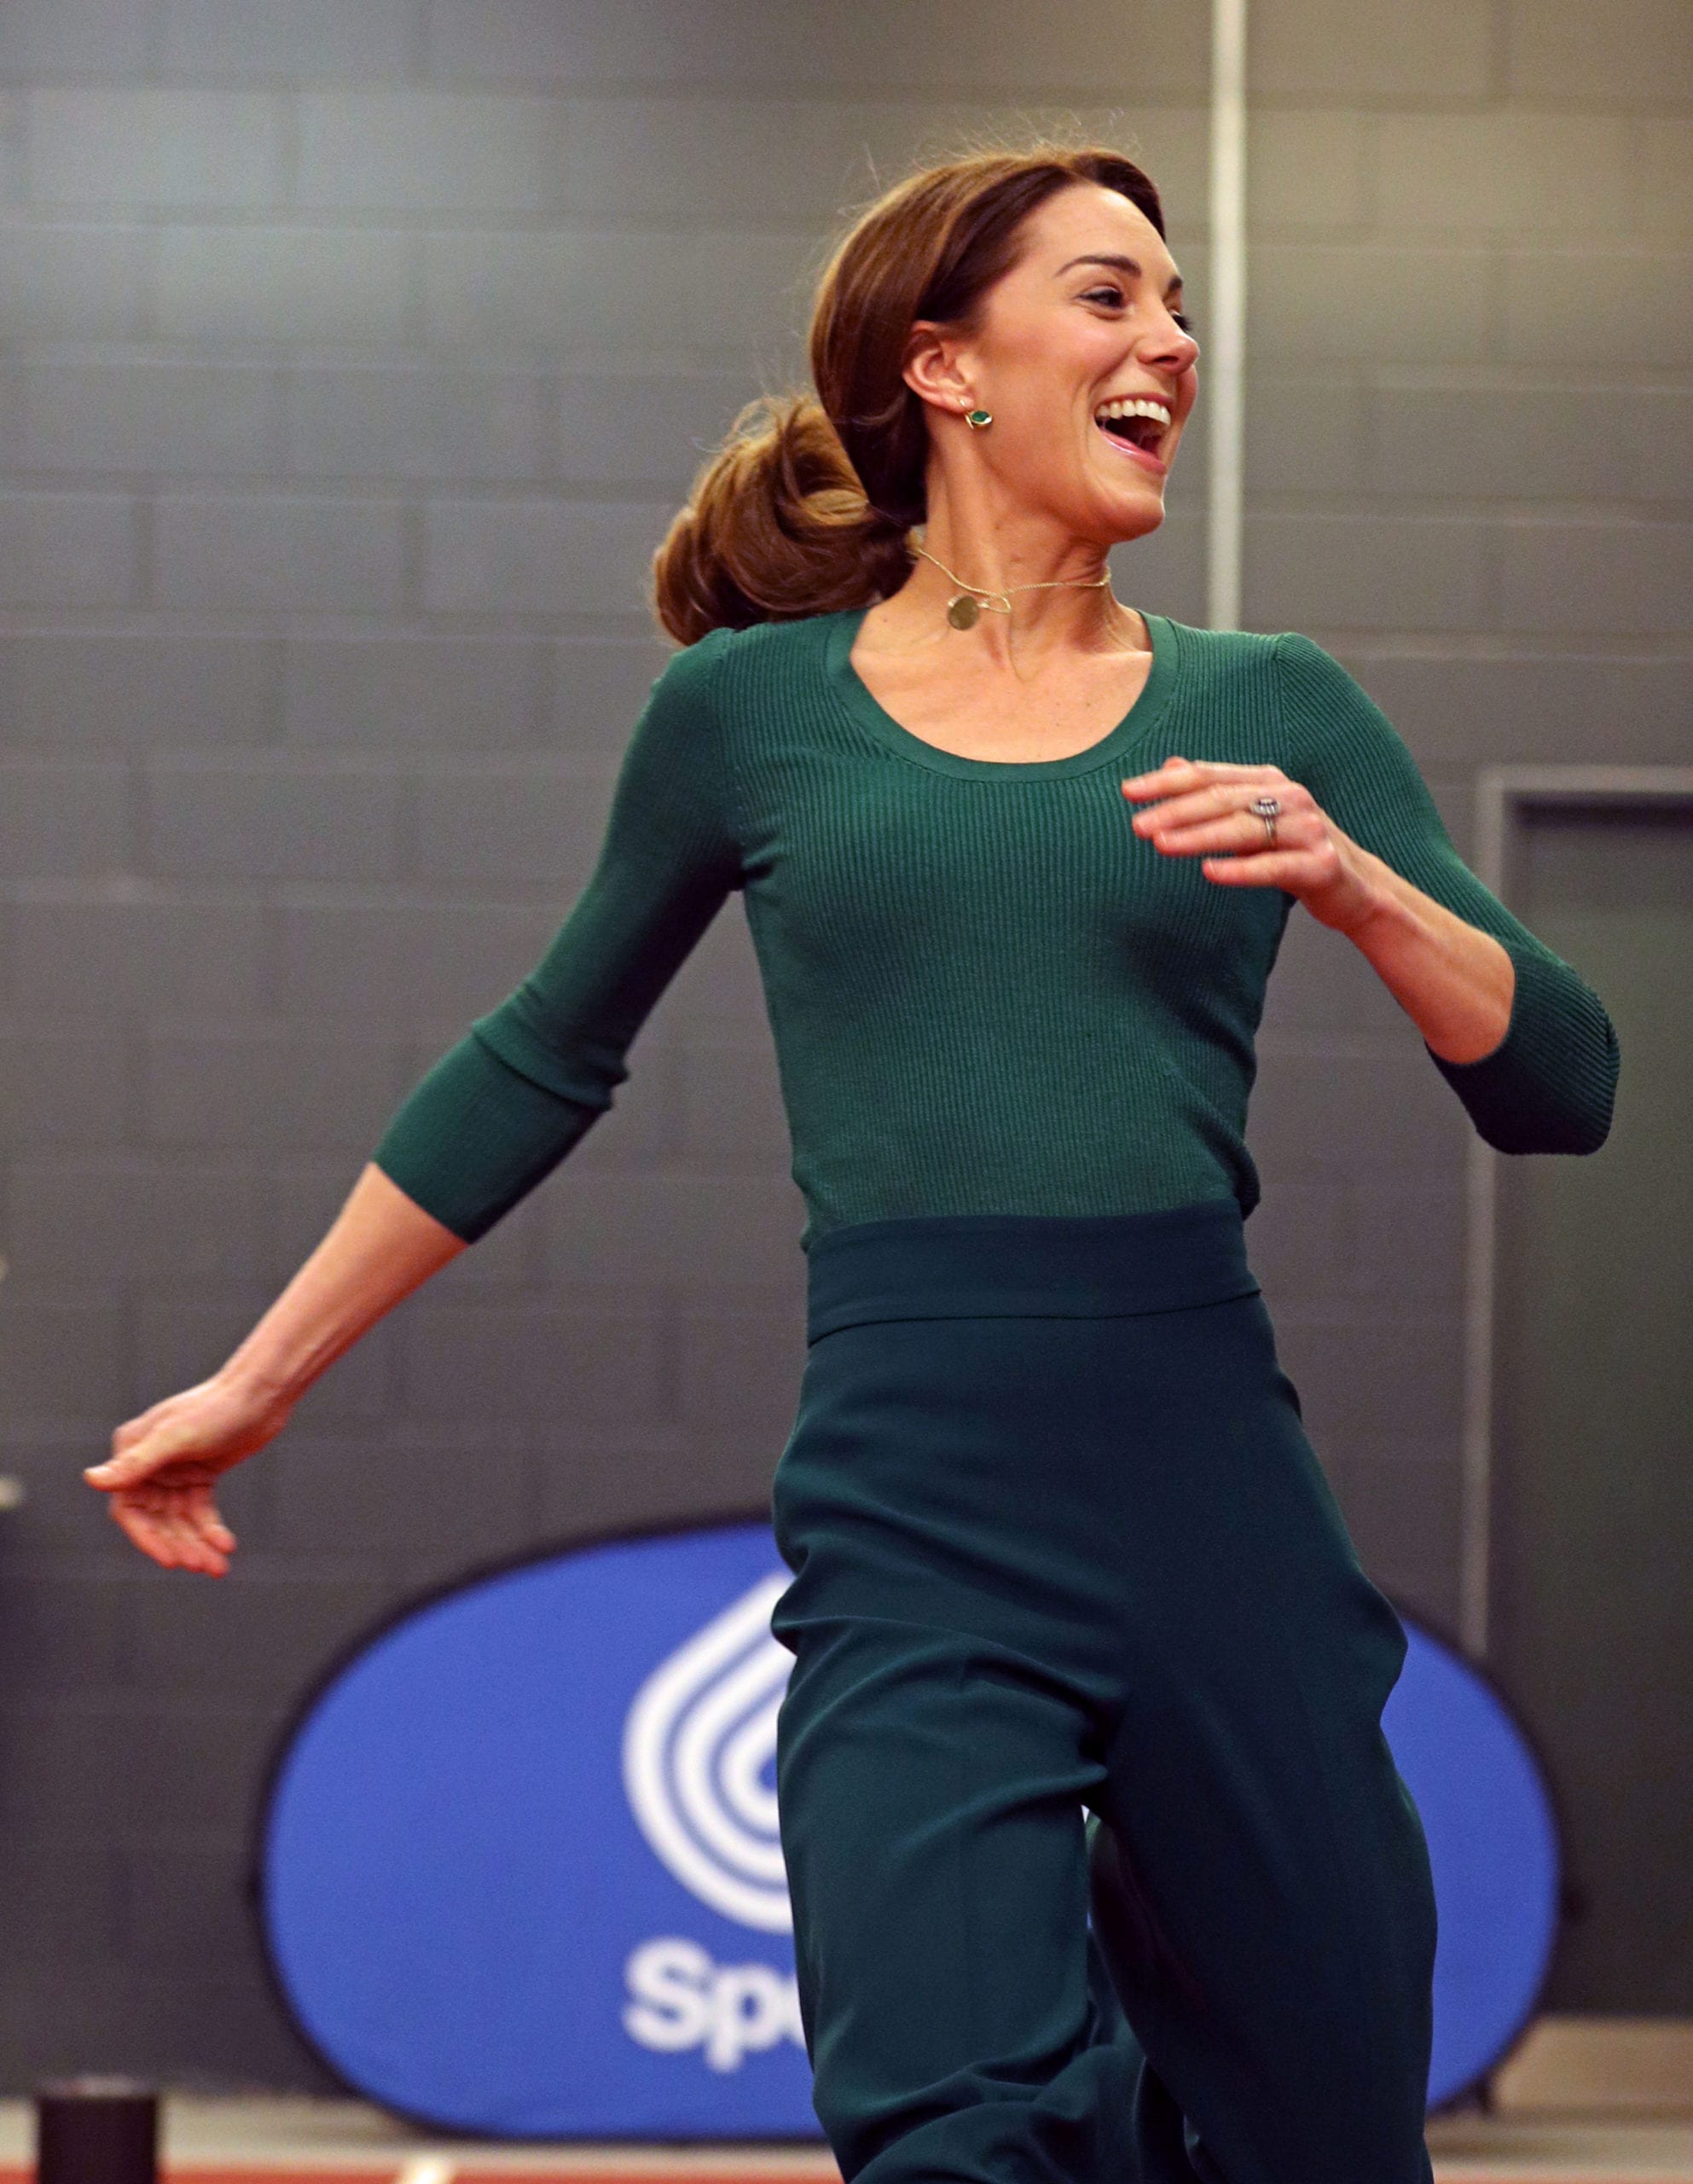 Britain's Catherine, Duchess of Cambridge, attends a SportsAid event at the London Stadium at the Olympic Park in Stratford in London, Britain February 26, 2020.  Yui Mok/Pool via REUTERS - RC2C8F91S9JZ